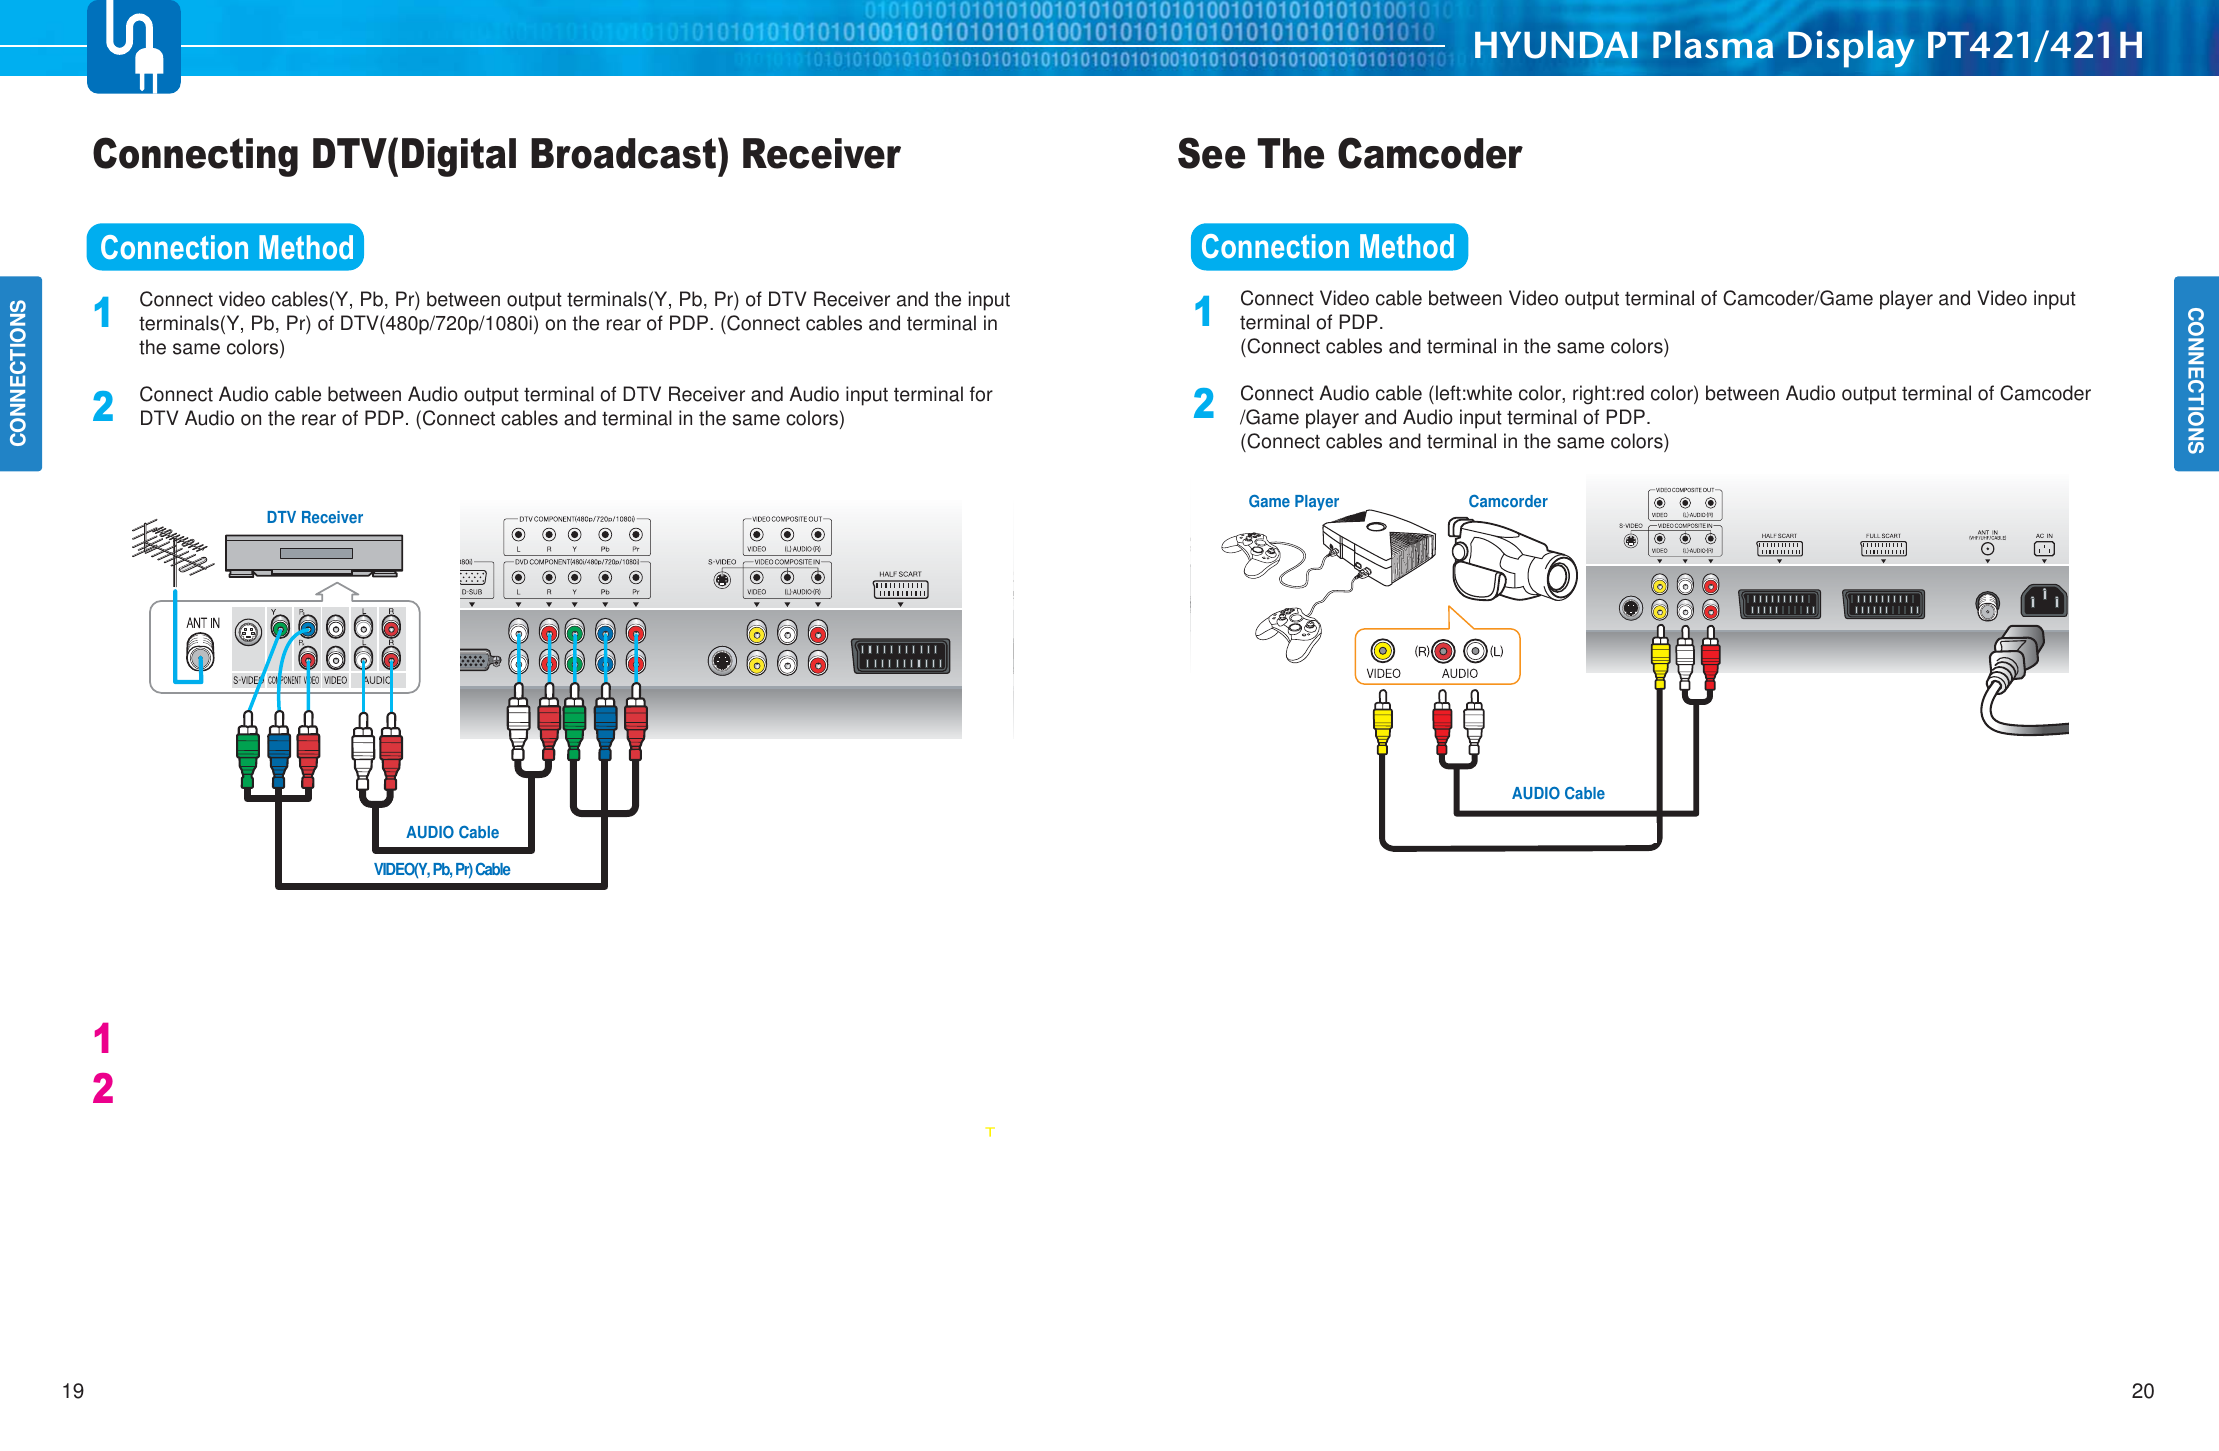 CONNECTIONSHYUNDAI Plasma Display PT421/421H2019CONNECTIONSConnecting DTV(Digital Broadcast) Receiver                         See The CamcoderConnection Method Connect video cables(Y, Pb, Pr) between output terminals(Y, Pb, Pr) of DTV Receiver and the inputterminals(Y, Pb, Pr) of DTV(480p/720p/1080i) on the rear of PDP. (Connect cables and terminal inthe same colors) Connect Audio cable between Audio output terminal of DTV Receiver and Audio input terminal forDTV Audio on the rear of PDP. (Connect cables and terminal in the same colors) How to Watch 1212DTV ReceiverVIDEO(Y, Pb, Pr) CableAUDIO CableConnection Method Connect Video cable between Video output terminal of Camcoder/Game player and Video inputterminal of PDP.(Connect cables and terminal in the same colors)   Connect Audio cable (left:white color, right:red color) between Audio output terminal of Camcoder/Game player and Audio input terminal of PDP. (Connect cables and terminal in the same colors)  How to Watch12Game Player CamcorderAUDIO Cable